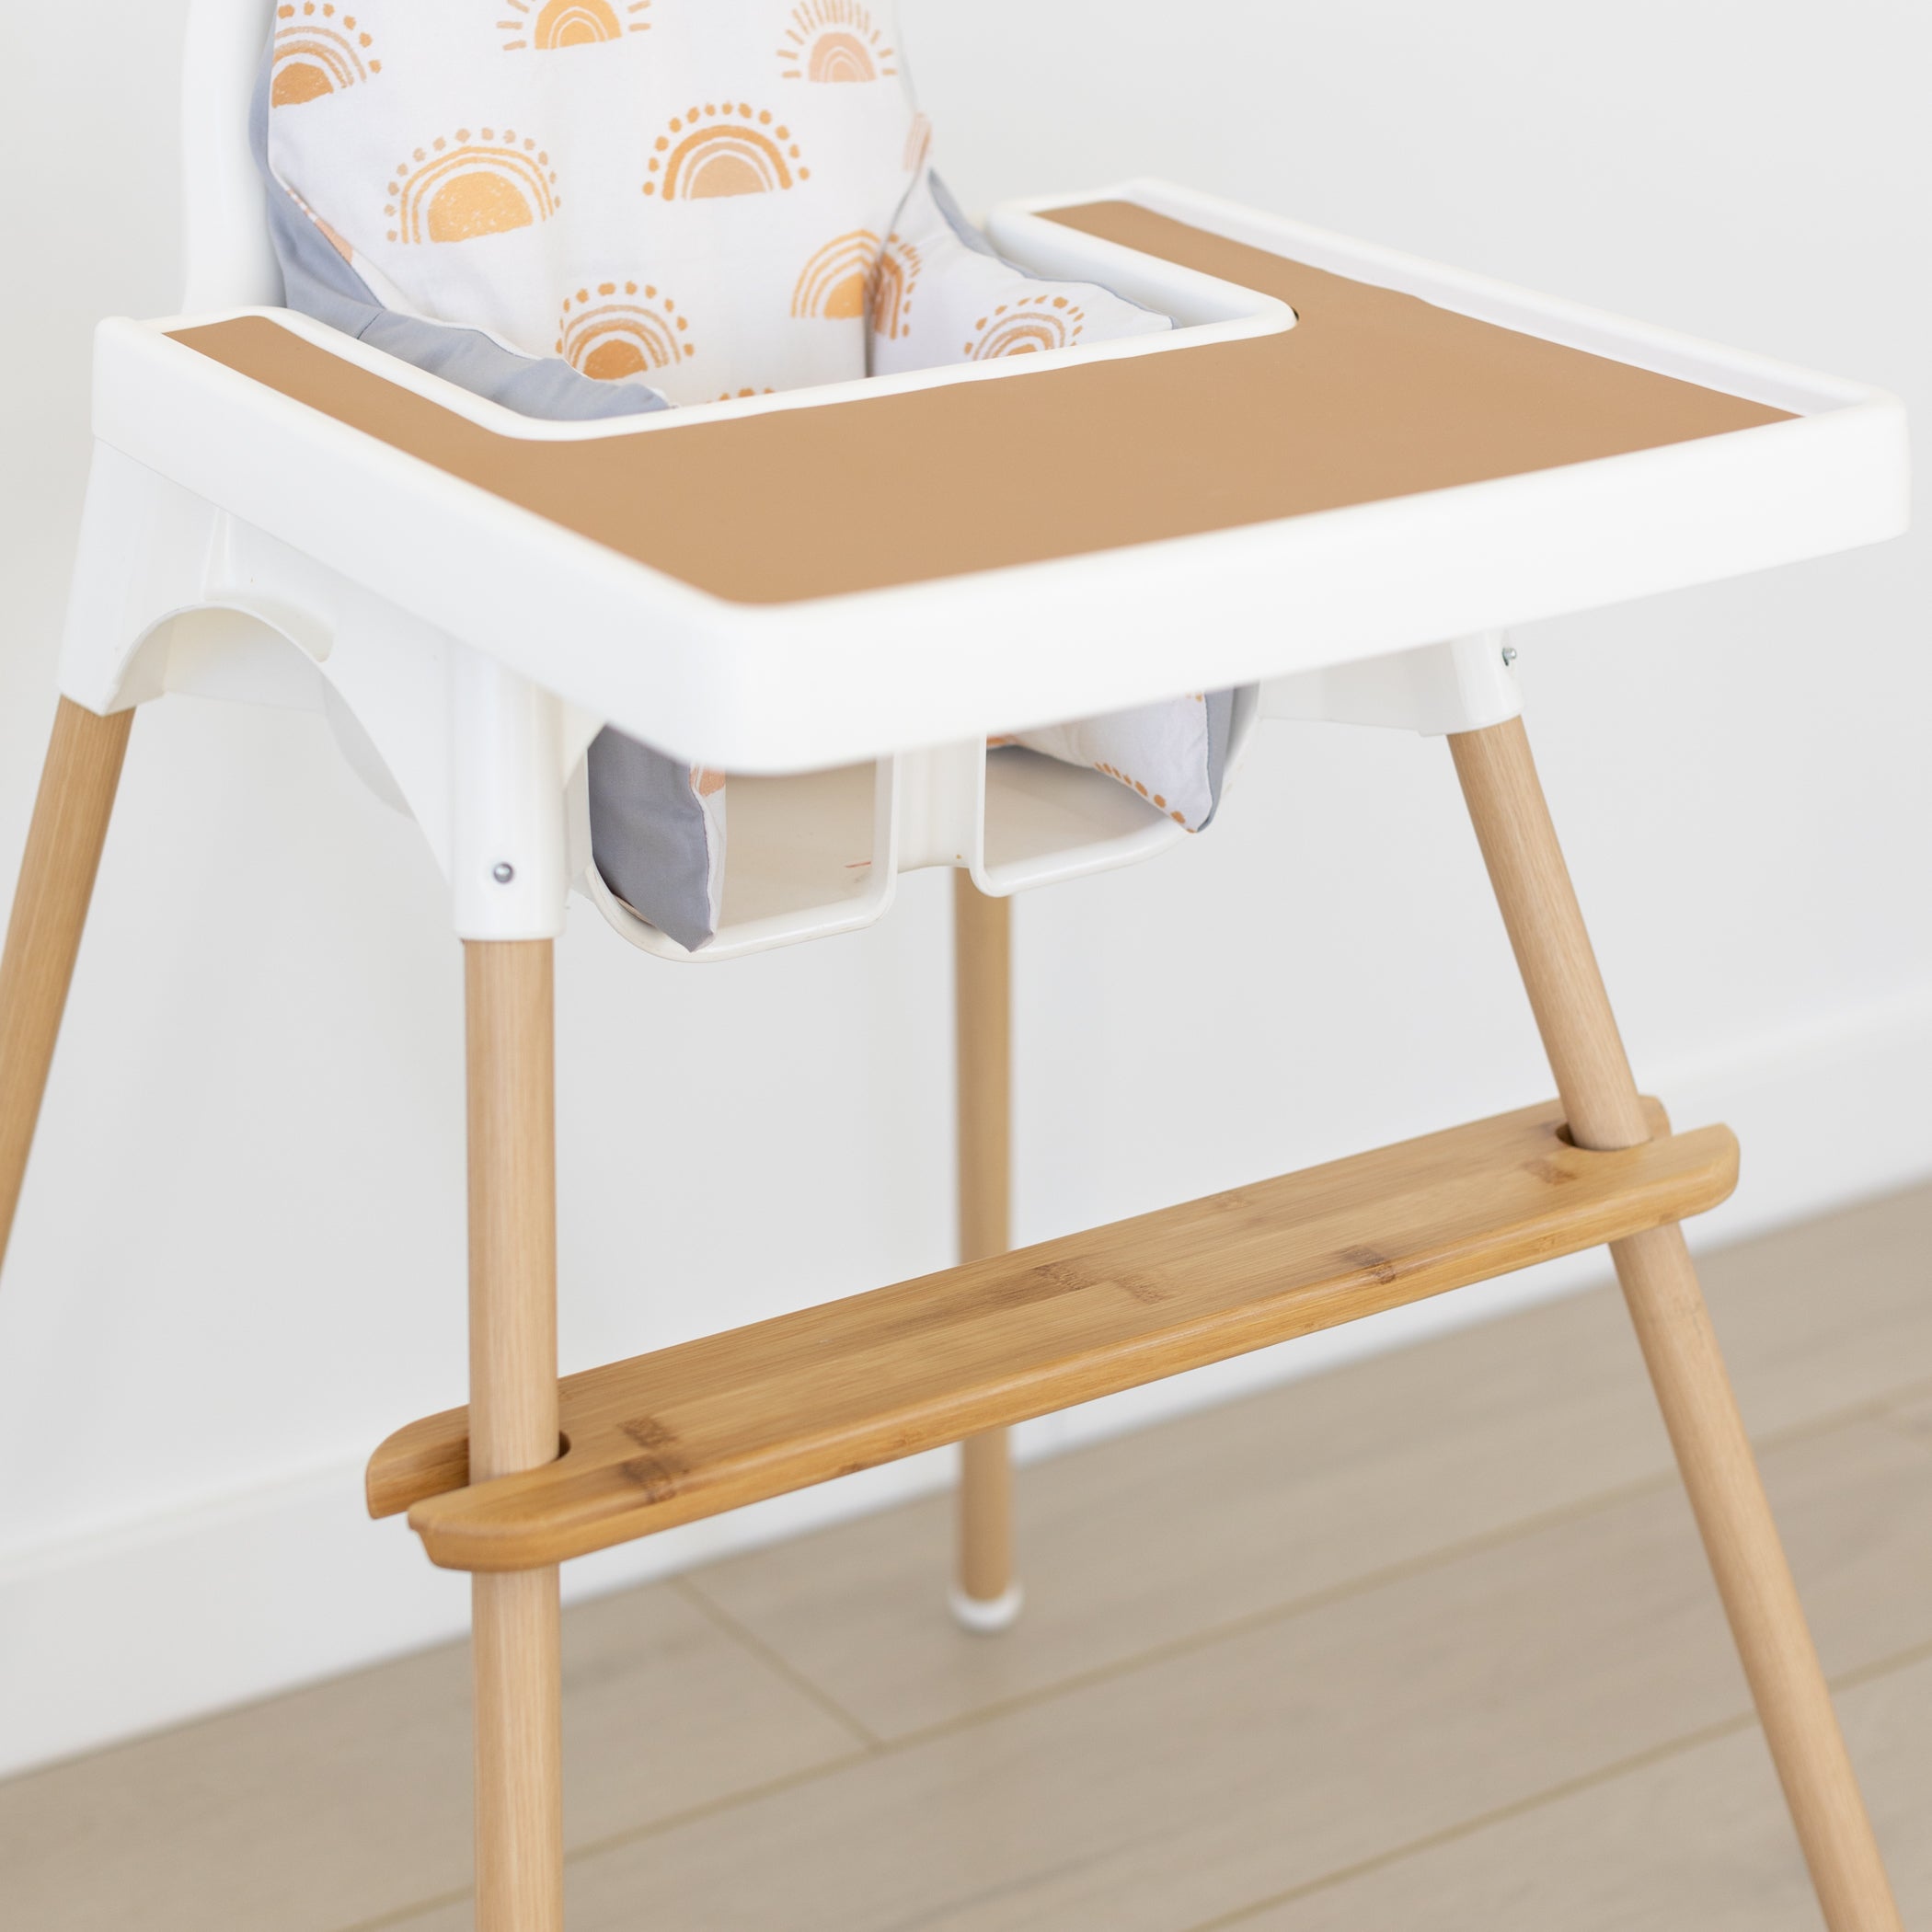 Hosanna Sales White IKEA High Chair Foot Rest Compatible with Antilop Chairs | Adjustable Reversible & Non-Slip Rest for - Made Durable Polyprop